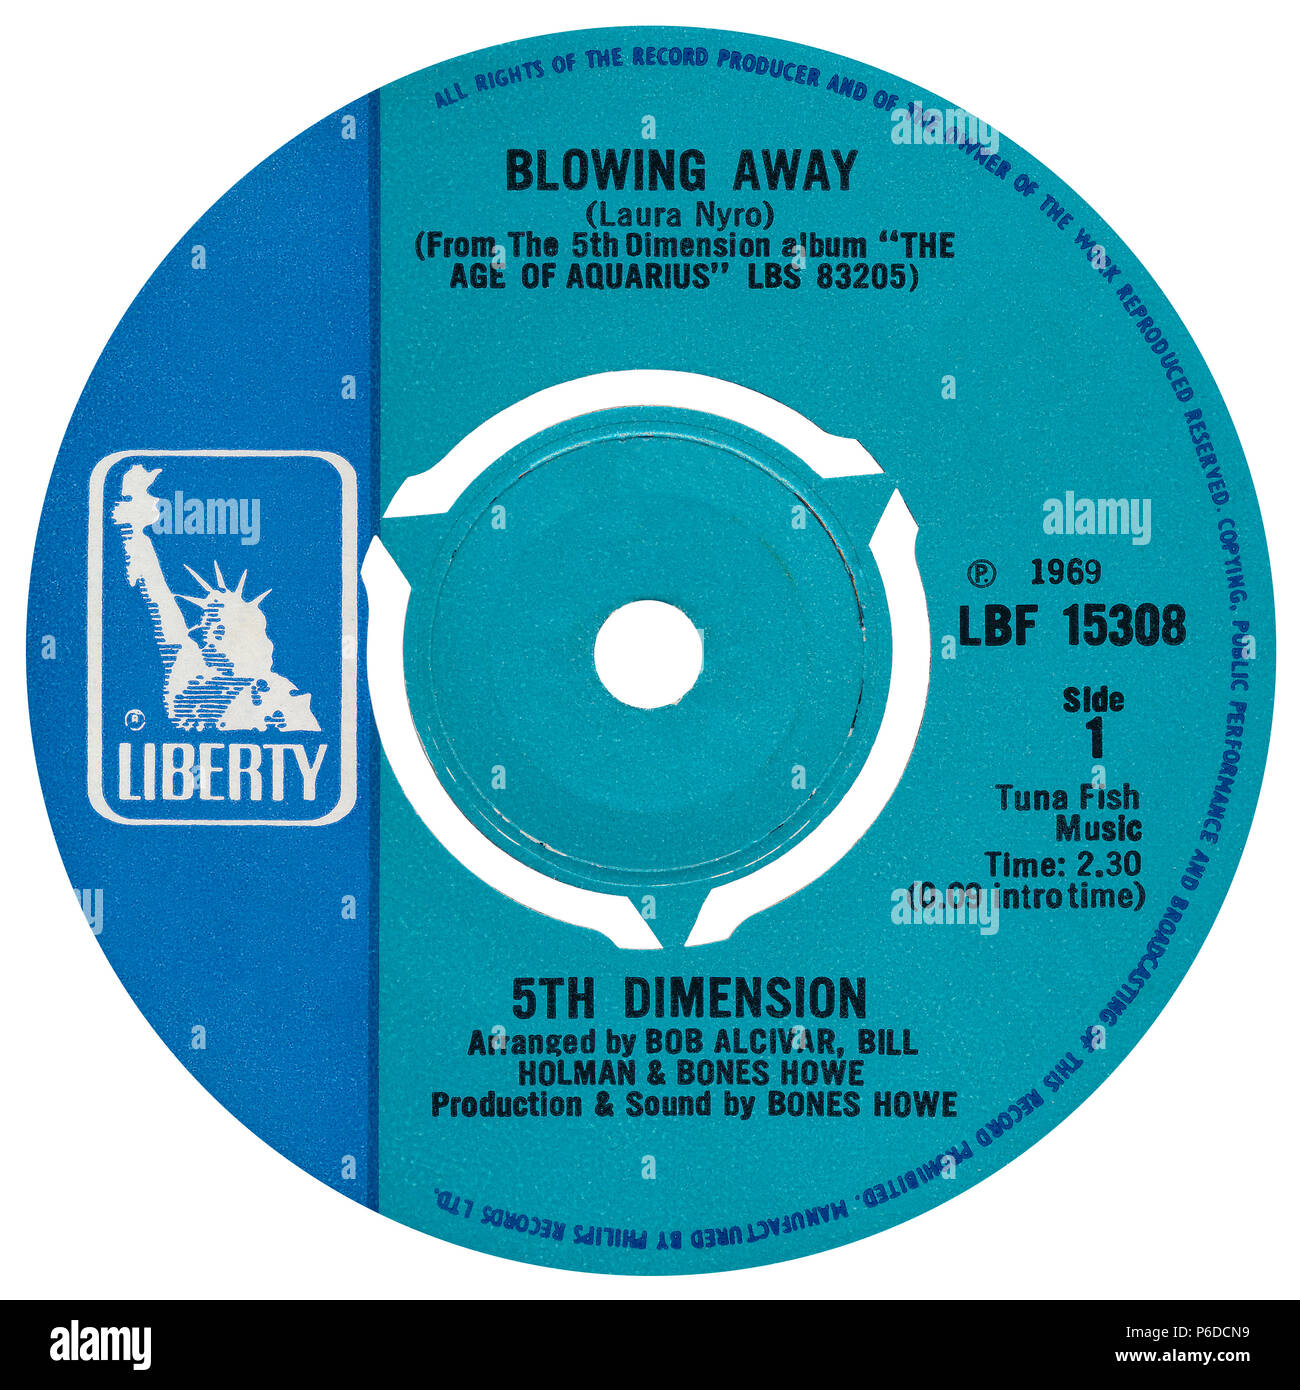 U.K. 45 rpm 7' single of Blowing Away by the 5th Dimension on the Liberty label from 1970. Composed by Laura Nyro, arranged by Bob Alcavar, Bill Holman and Bones Howe and produced by Bones Howe. Stock Photo